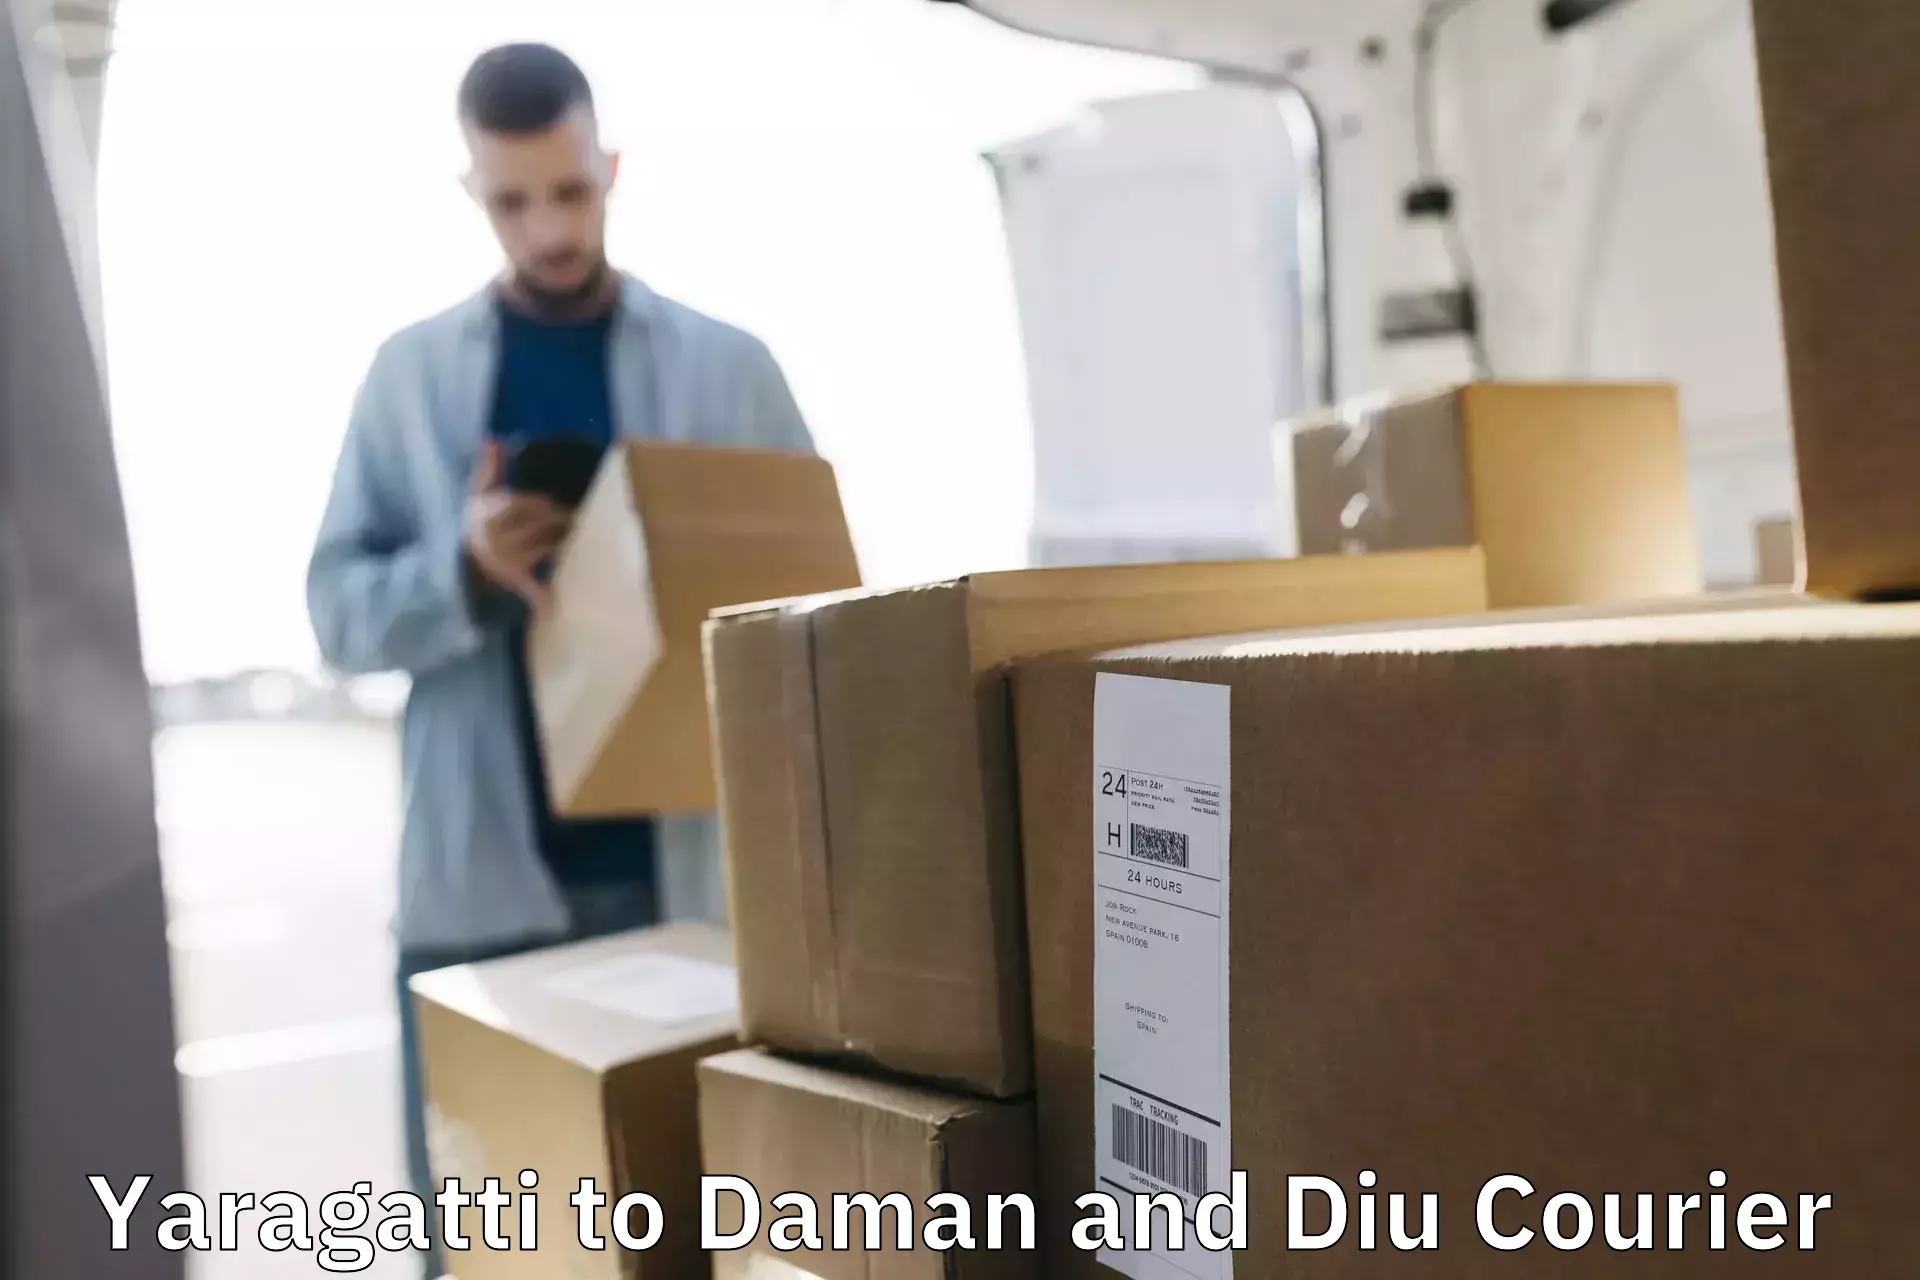 Express package delivery in Yaragatti to Diu